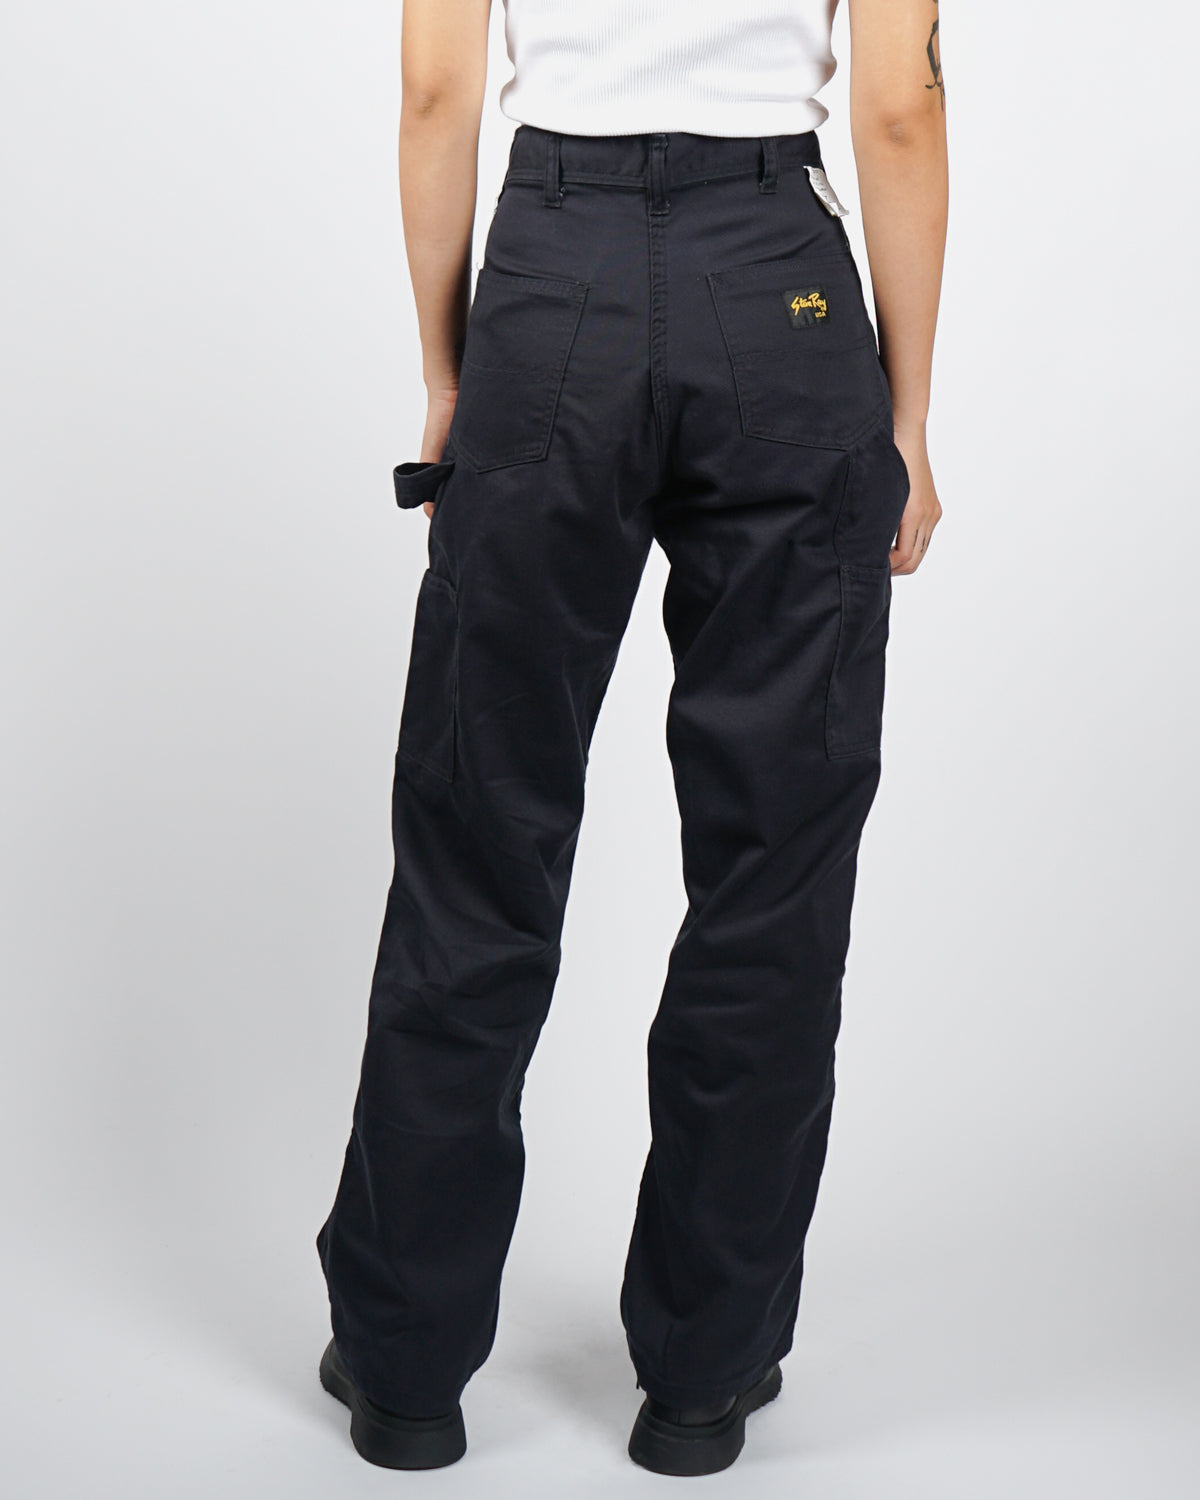 Stan Ray OG Painter Pants / Black – Front General Store